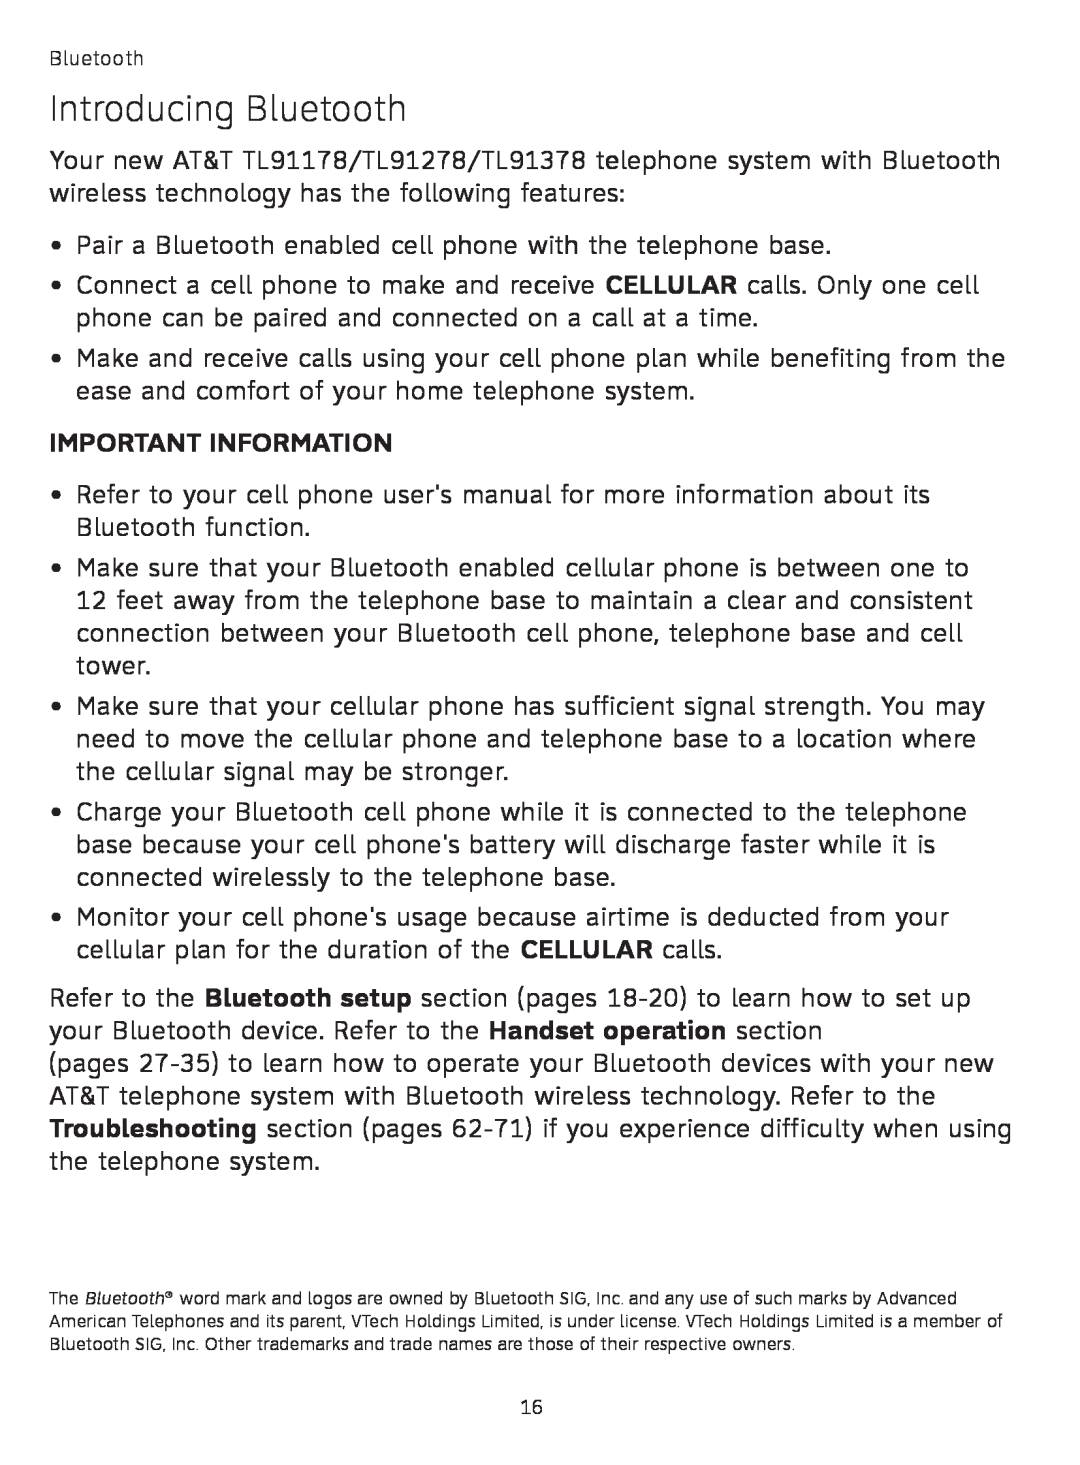 AT&T TL91378 Introducing Bluetooth, Pair a Bluetooth enabled cell phone with the telephone base, Important Information 